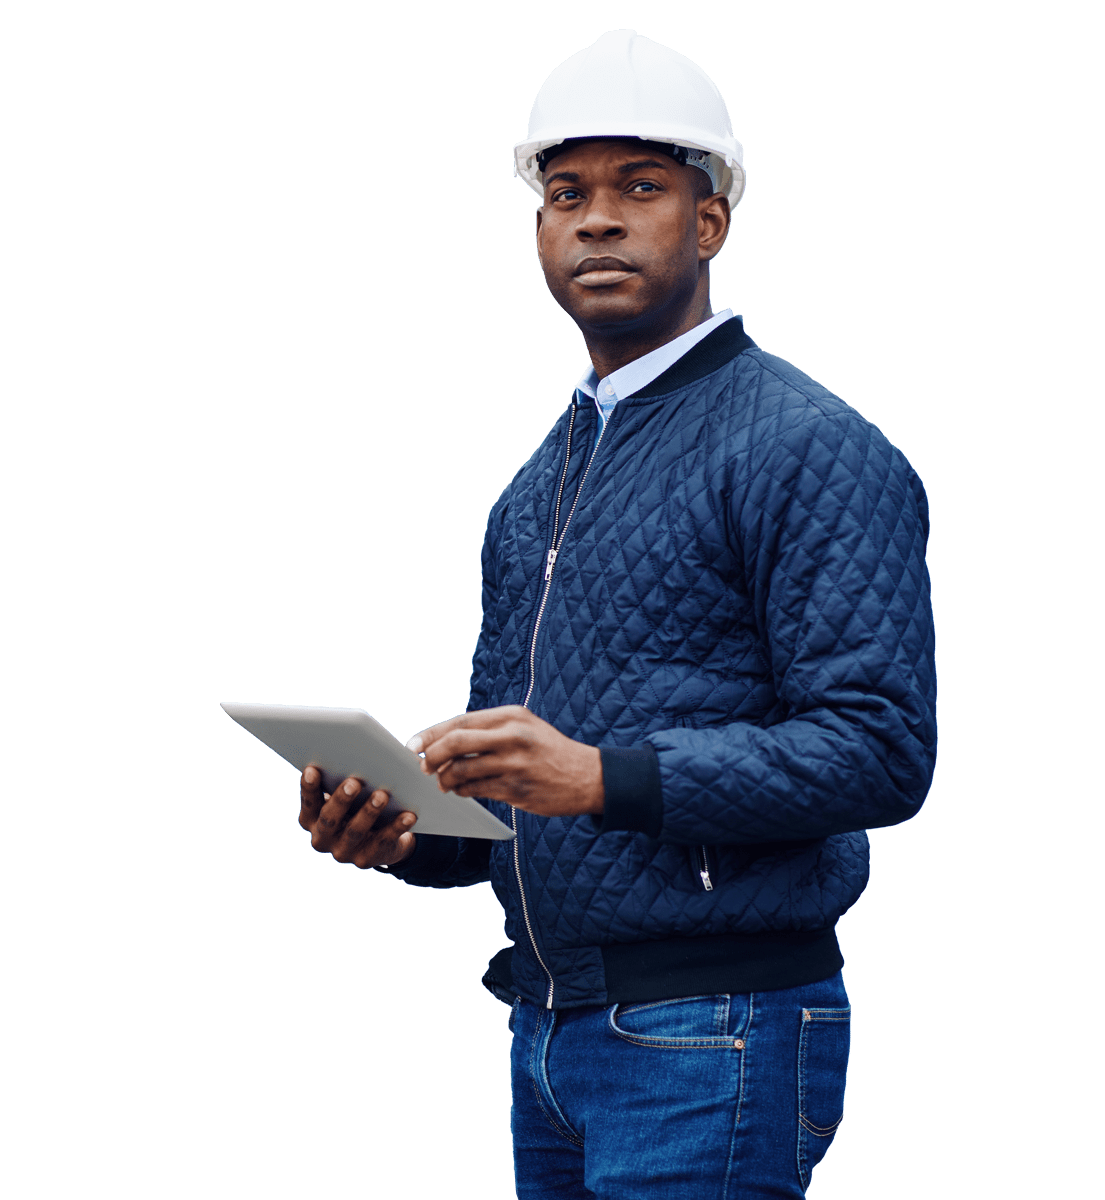 A man in a hard hat and jacket holding a tablet.